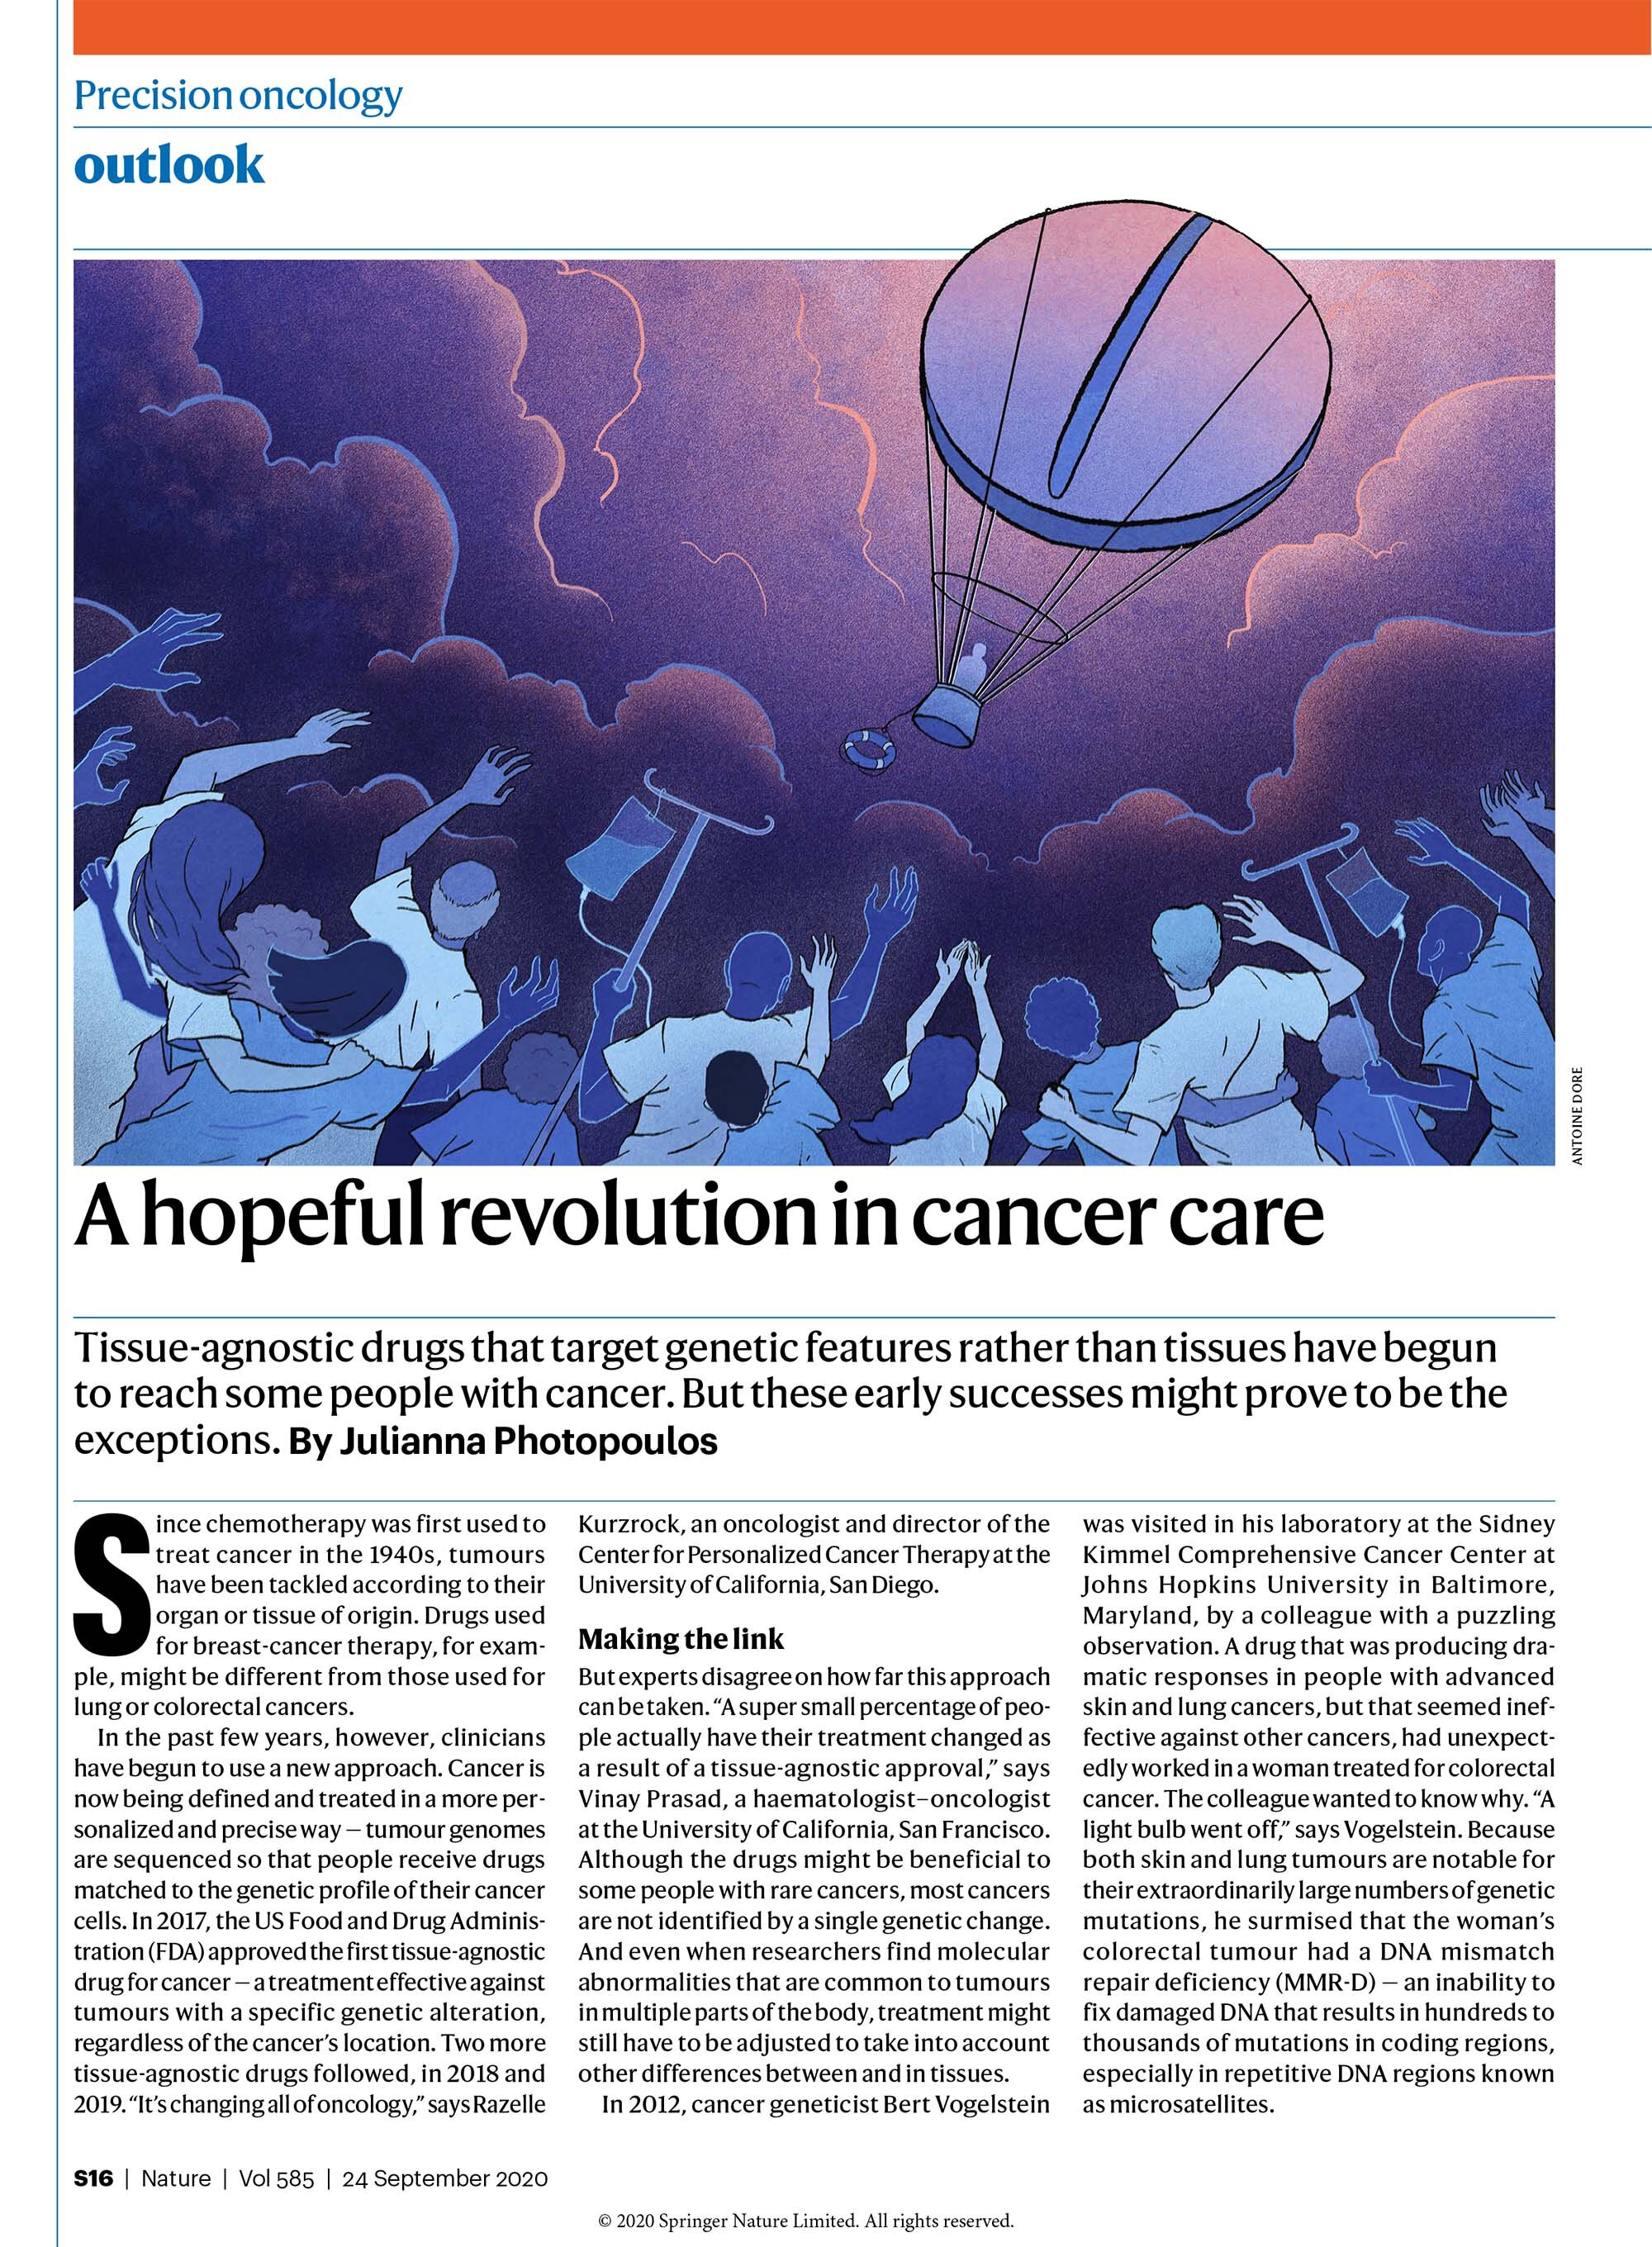 antoinedore-illustration-editorial-science-precision-oncology.jpg